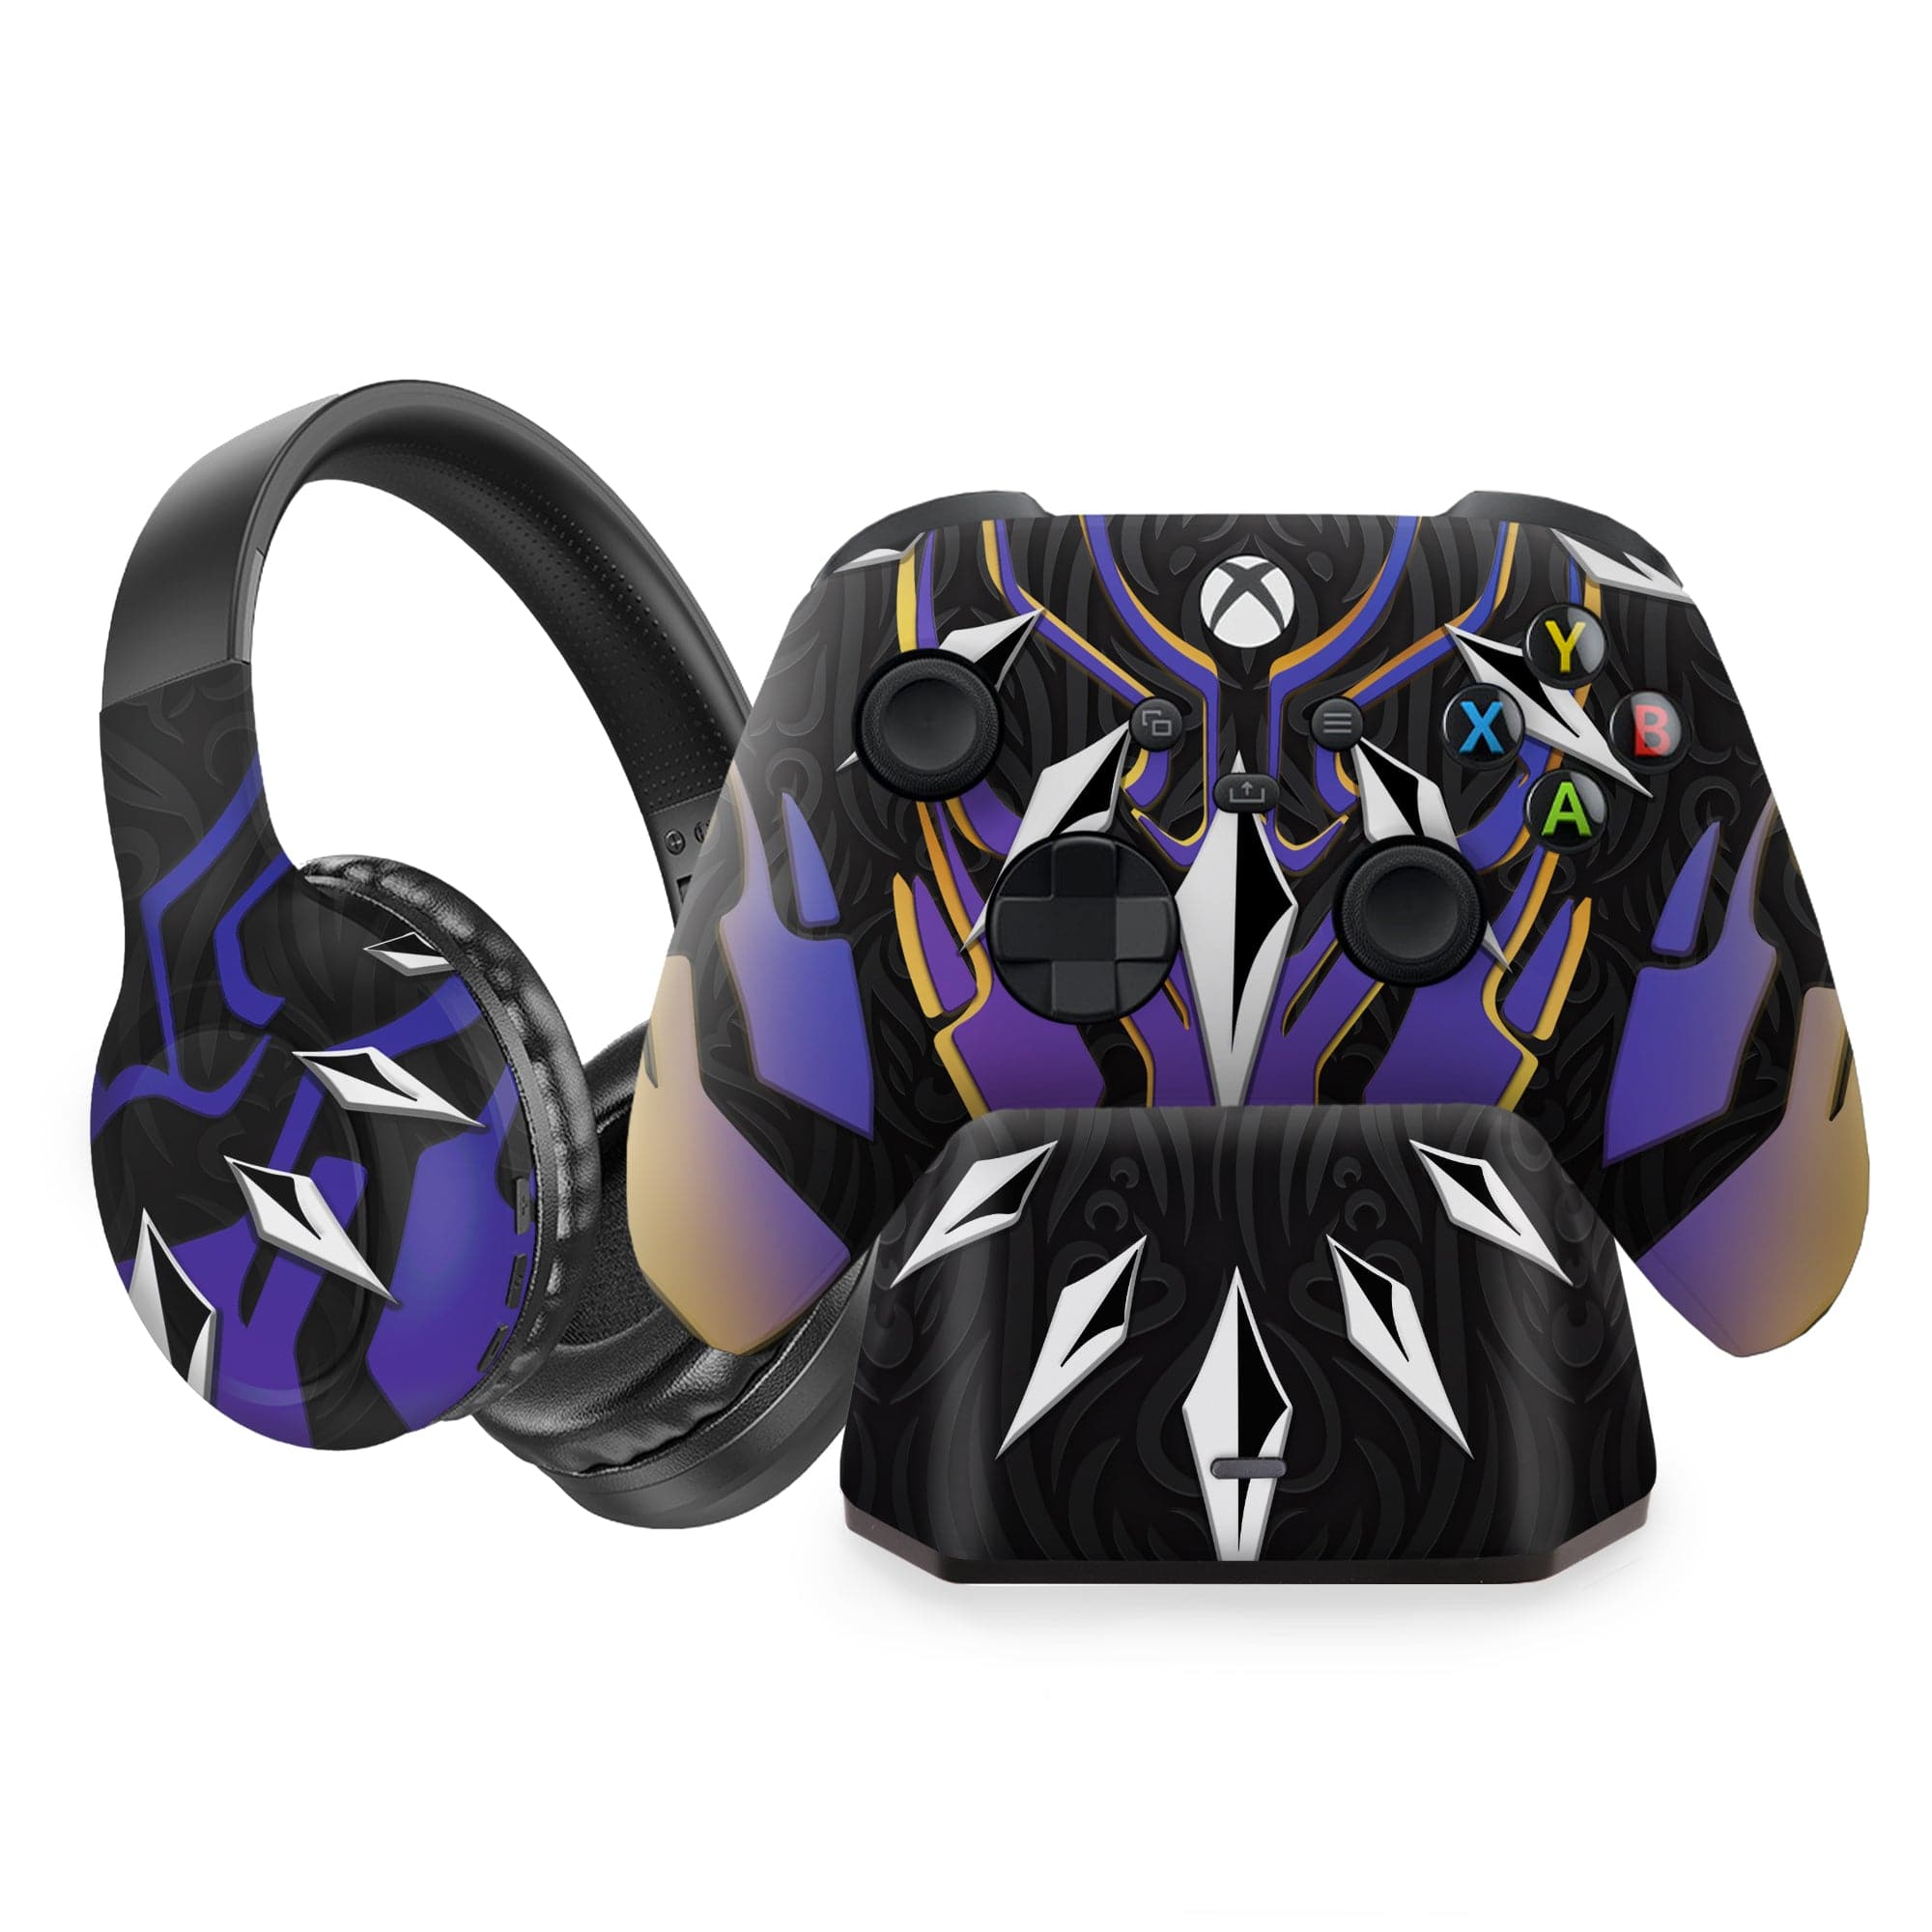 Black Panther 2: Wakanda Forever inspired Xbox Series X Modded Controller with Charging Station & Headphone